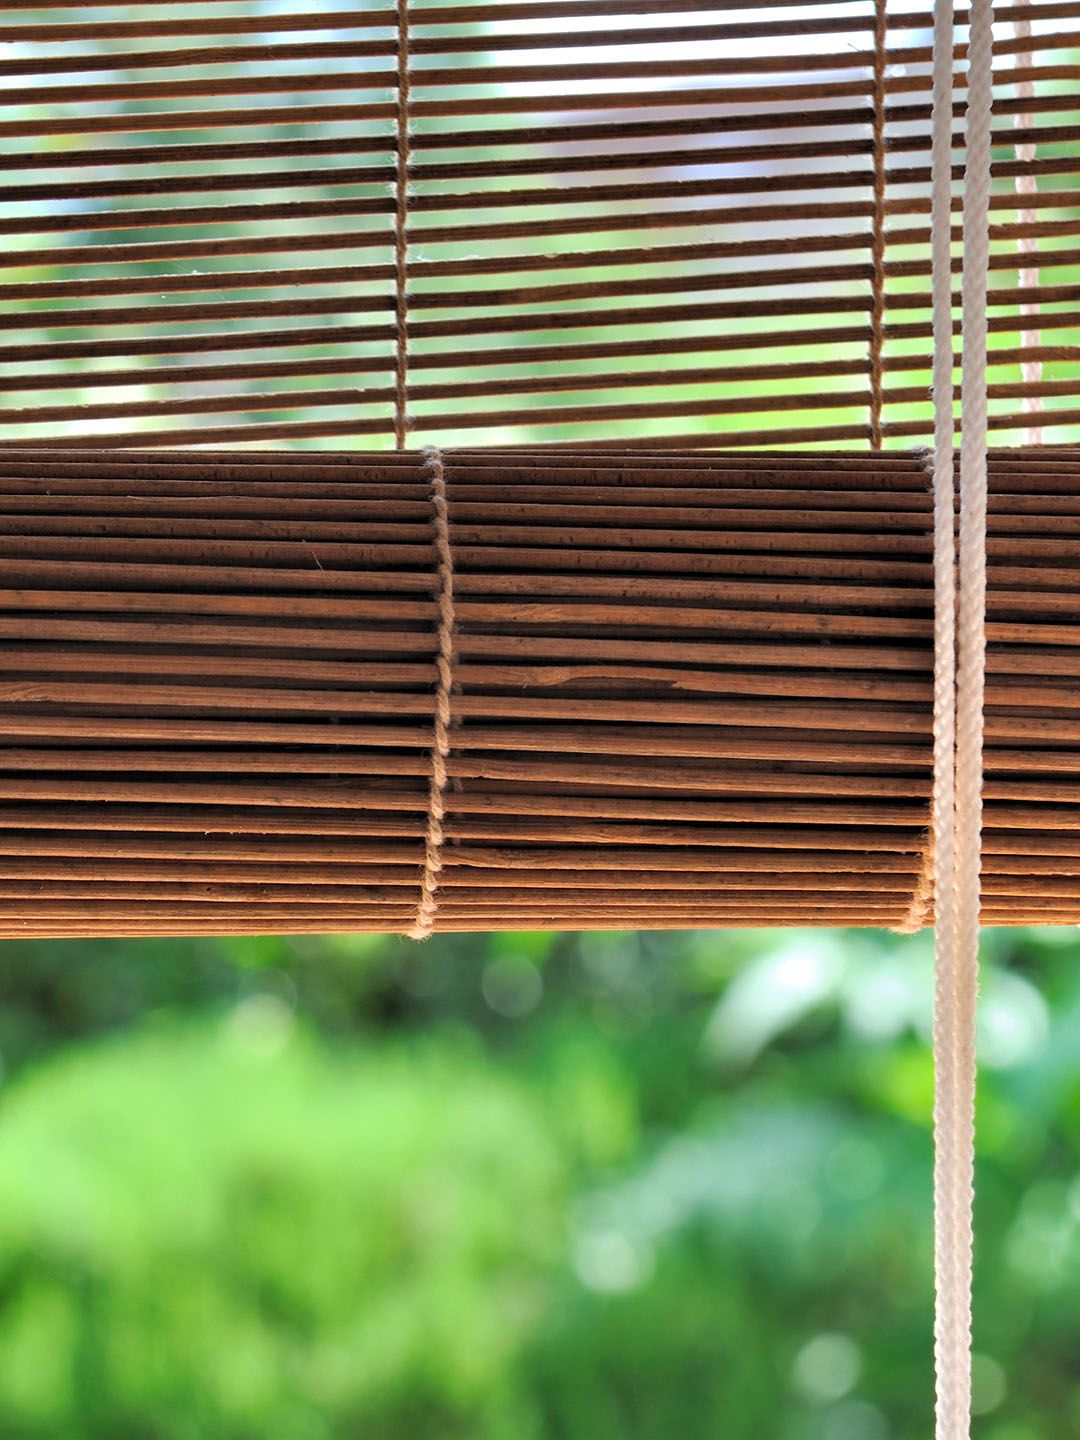 Bamboo blinds on an outdoor balcony in a Singapore home